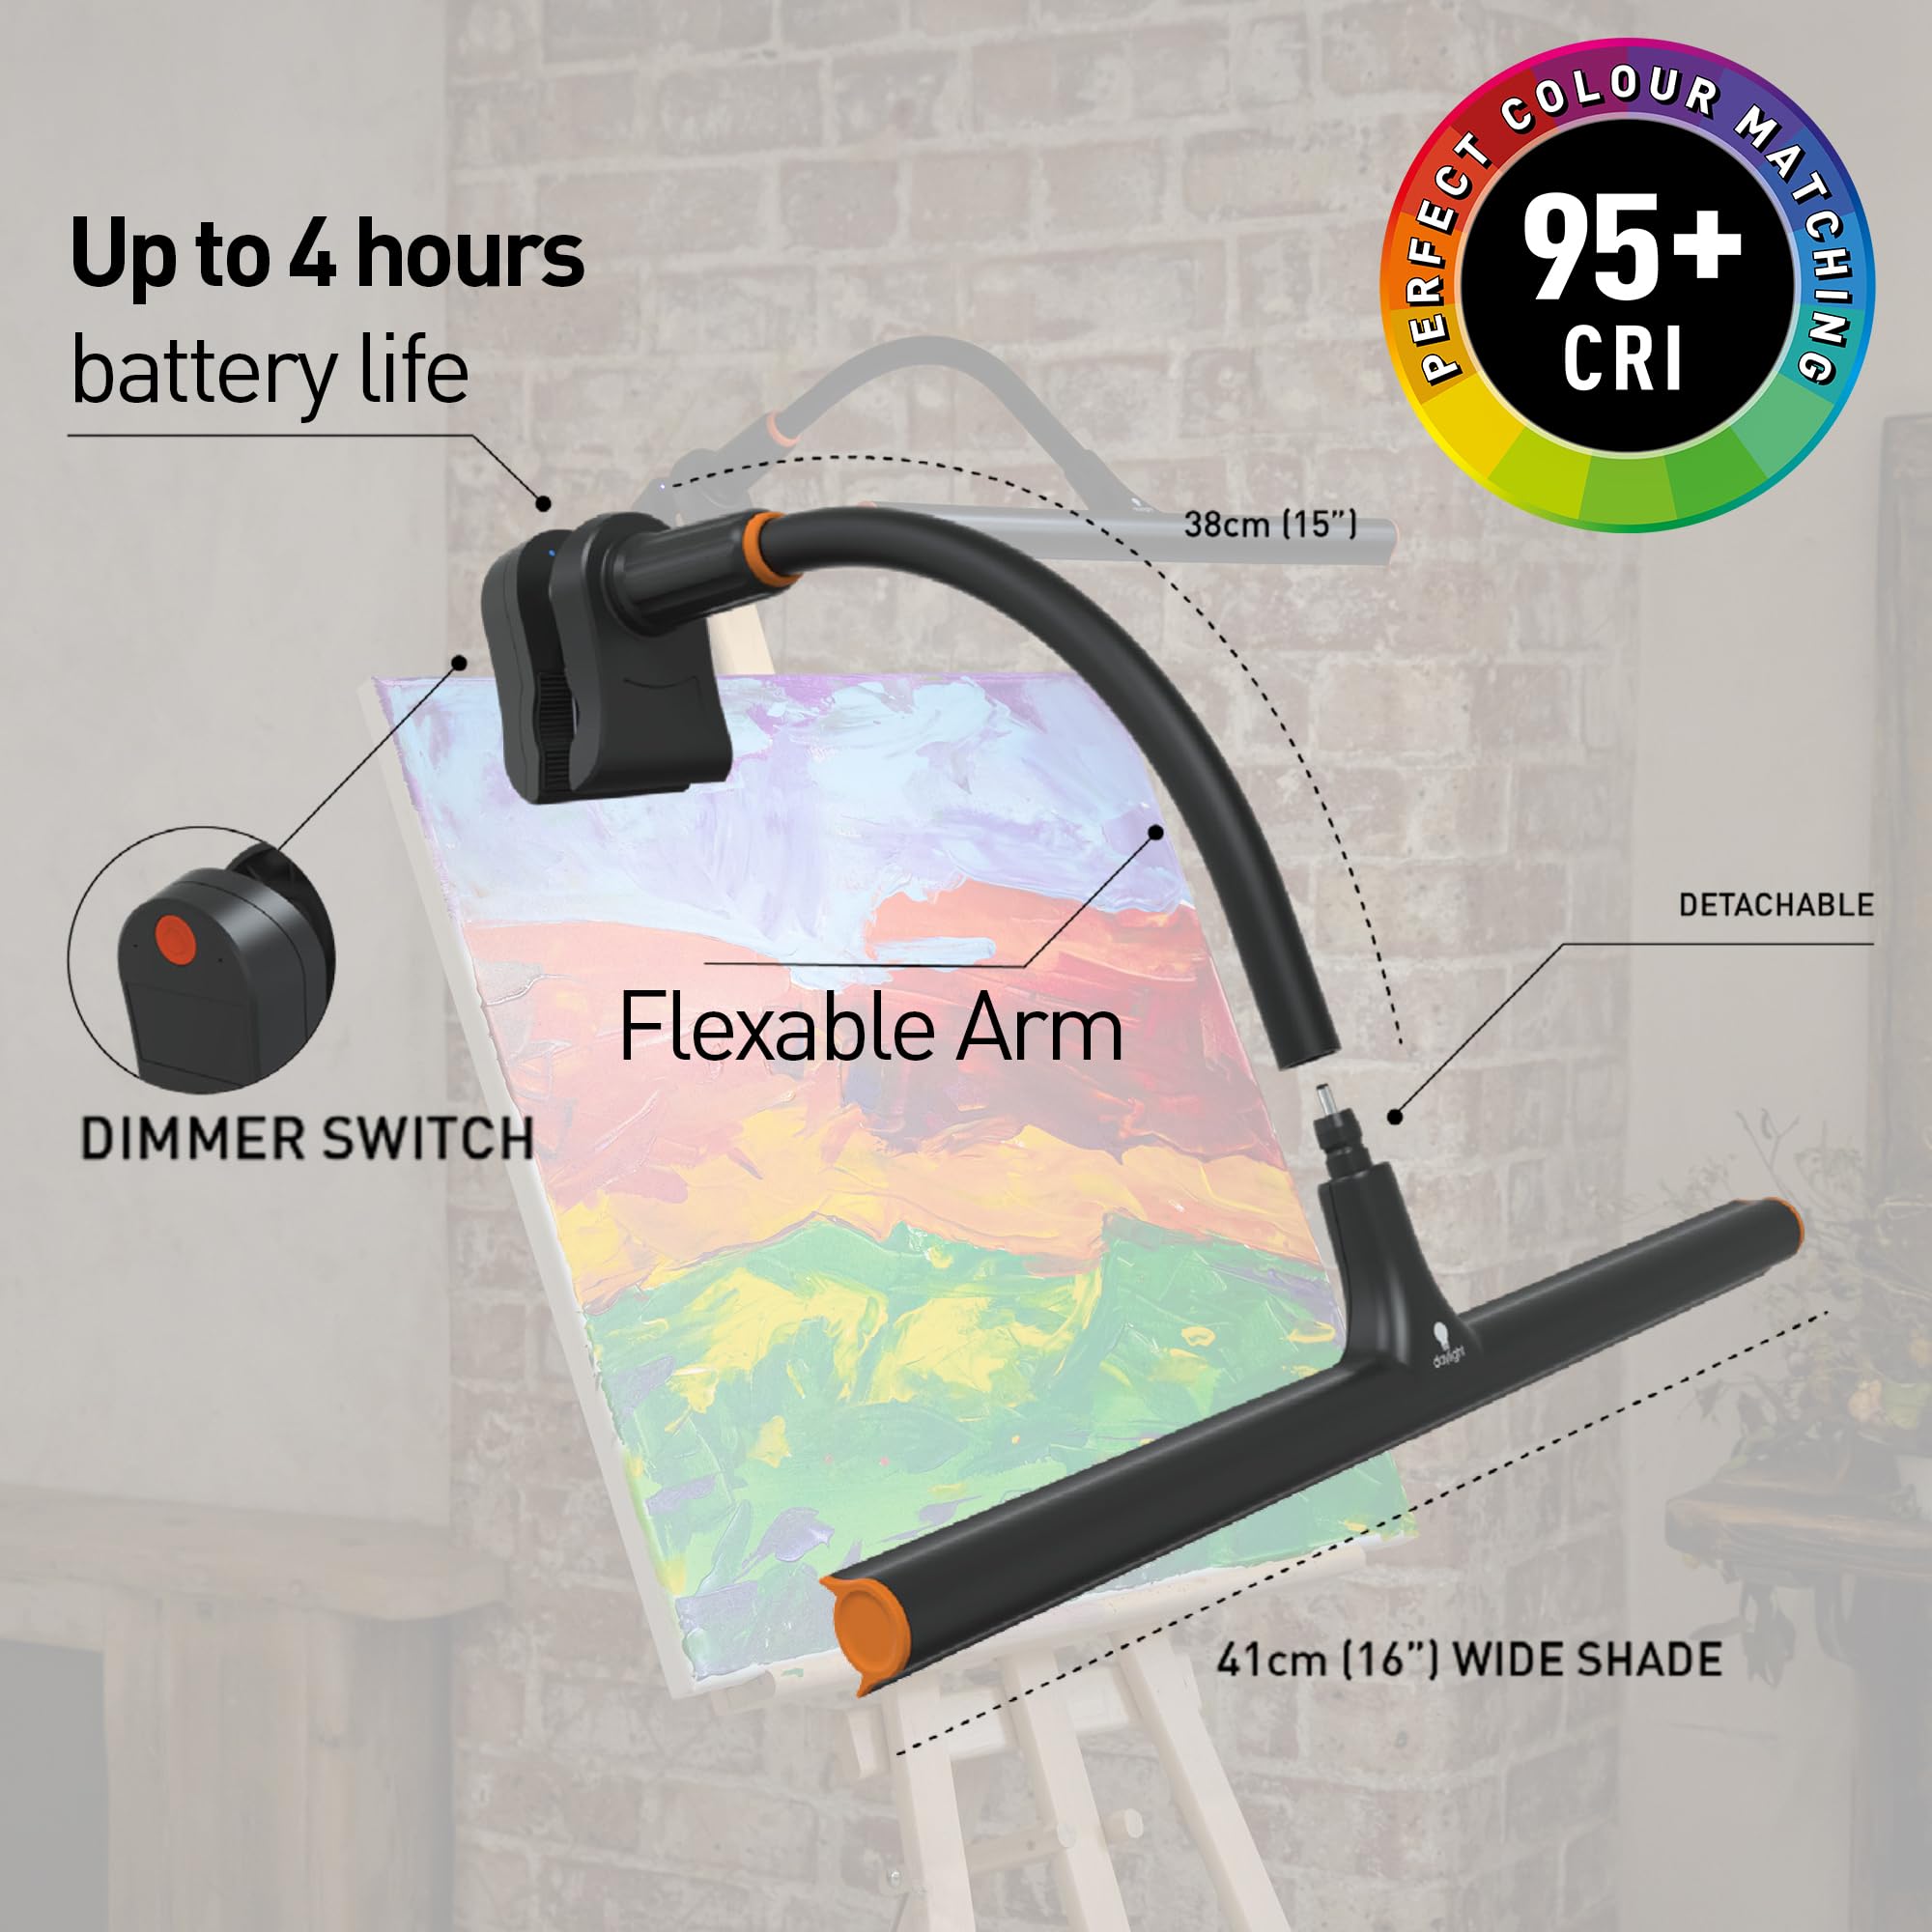 Daylight Company Easel Lamp Go™ Premium 95+ CRI LED Art Lamp with 3-Step Dimmer, USB-C Cable, and Built-in Battery for Superb Color Reproduction and Uninterrupted Illumination